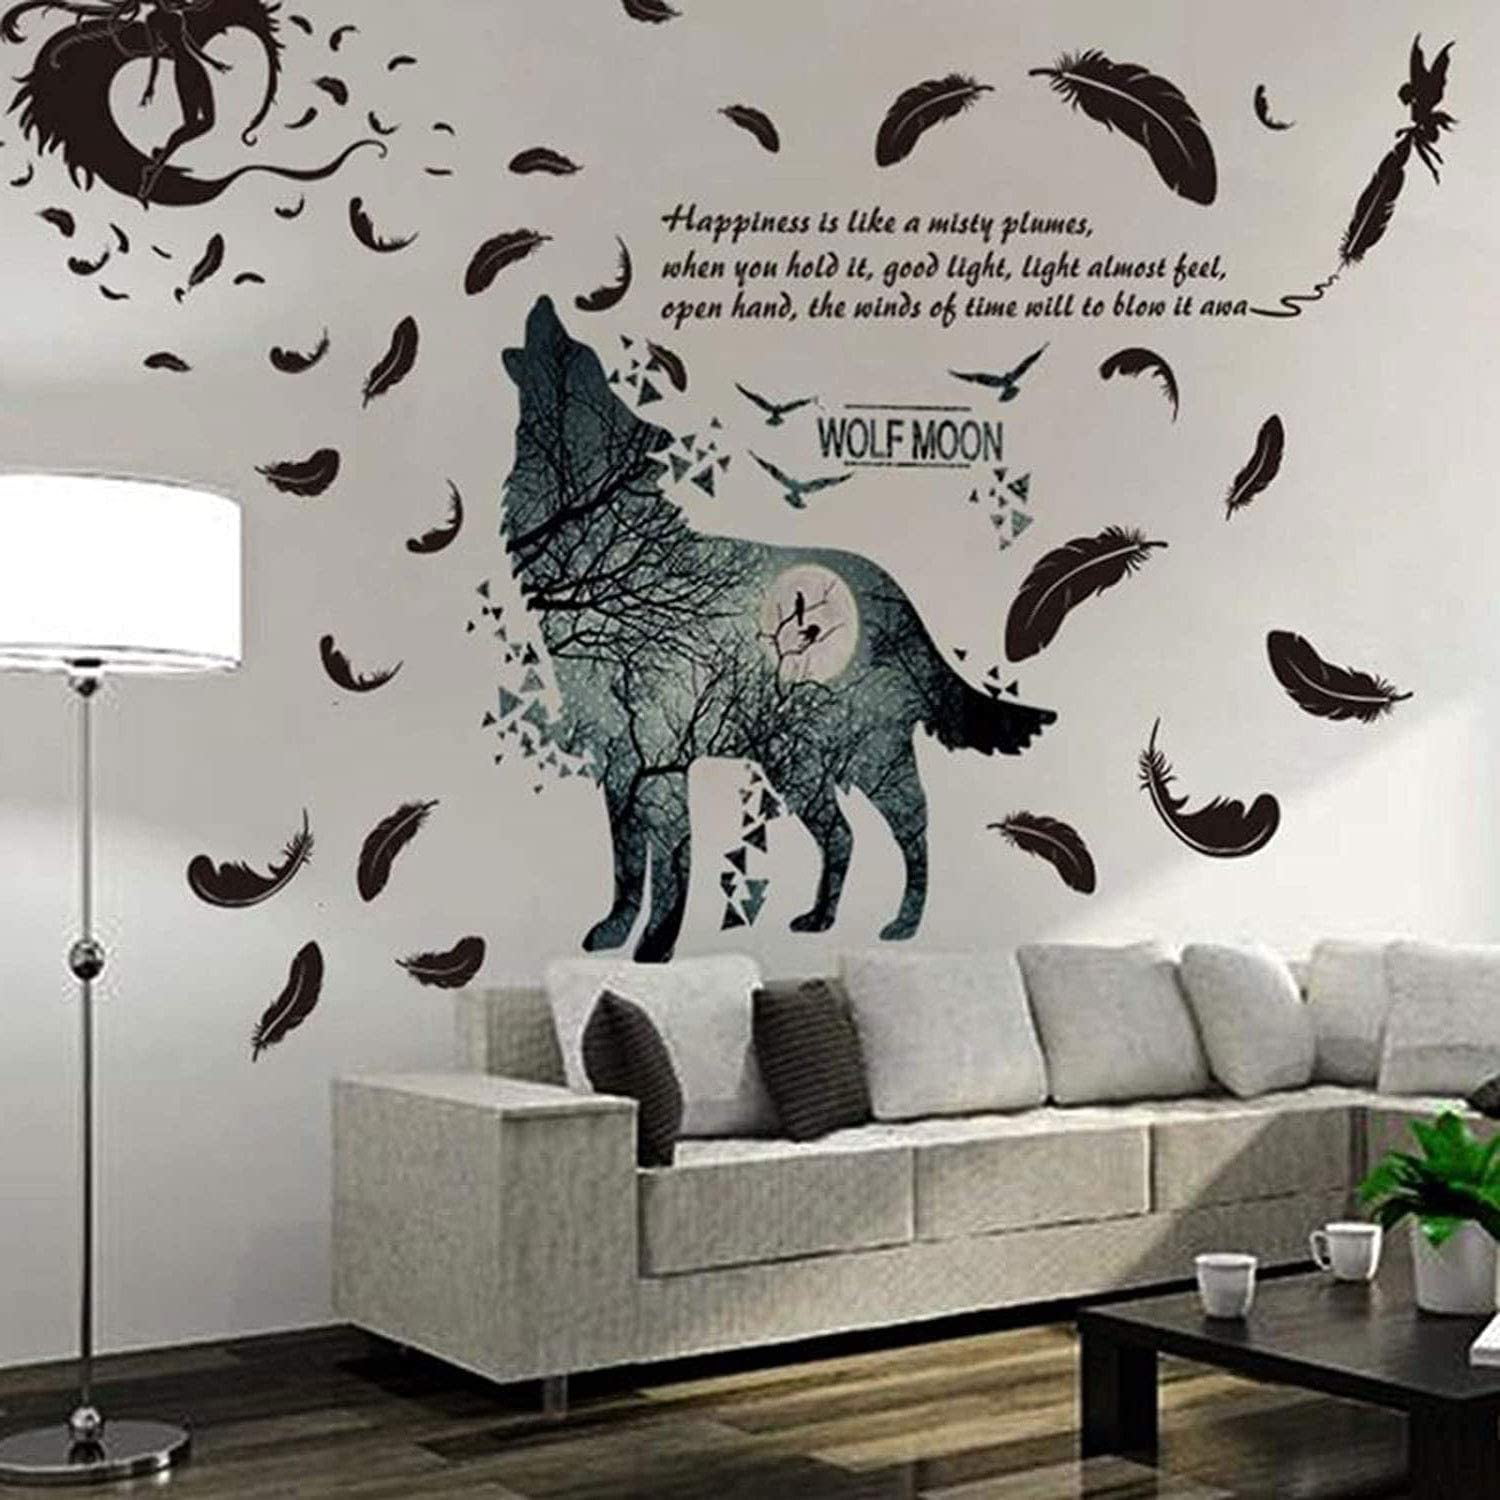 FOOTPRINTS ON THE MOON quote wall sticker bedroom family wall decal 